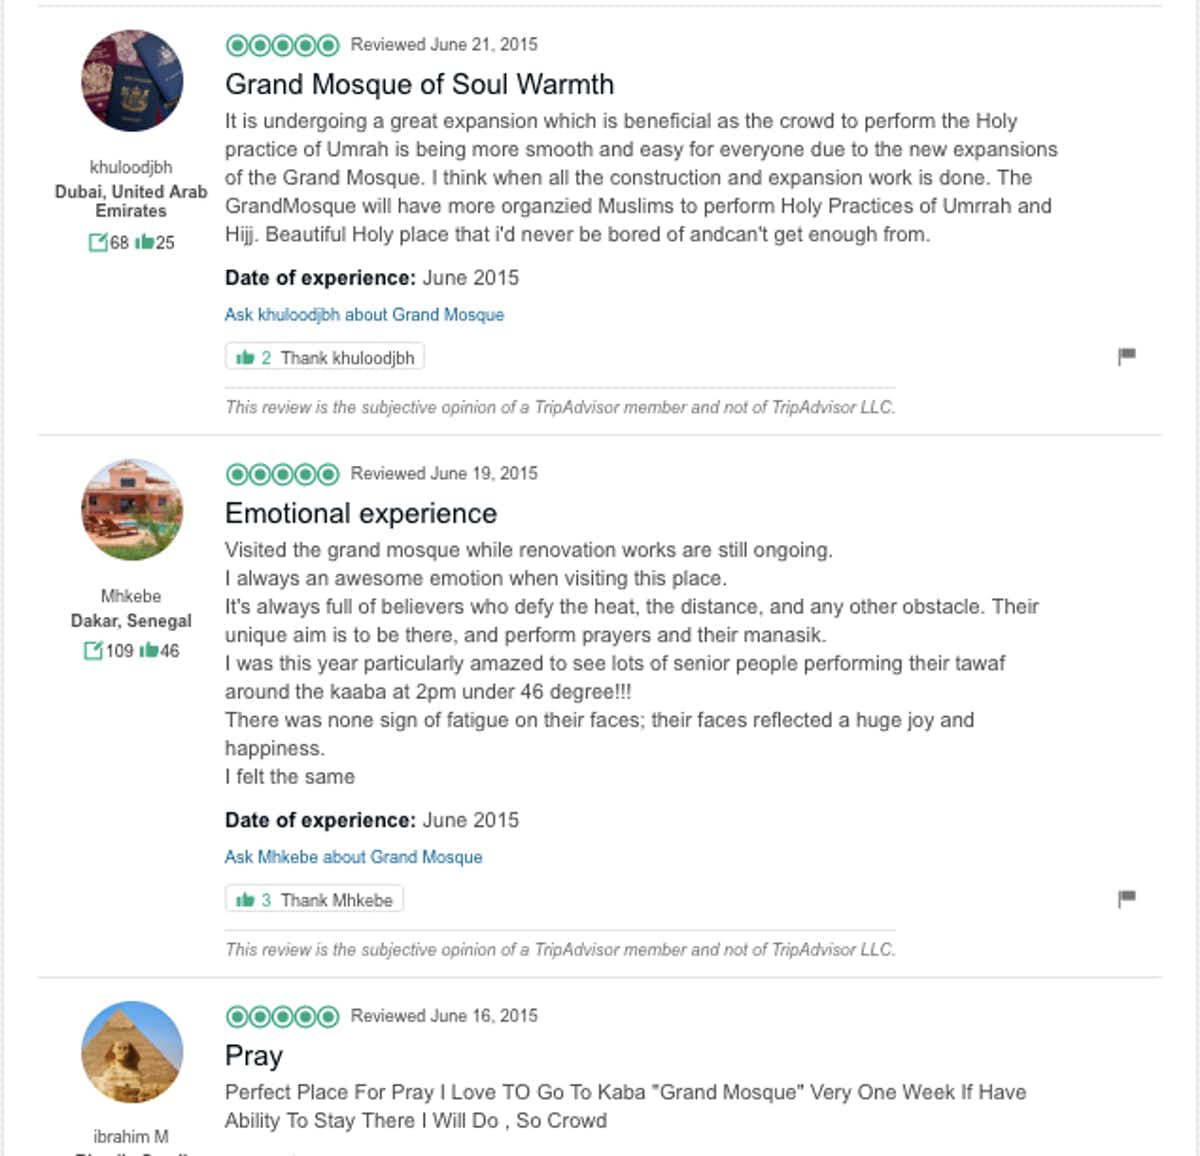 Everything in Mecca gets 5 stars — and online reviews of other holy sites are wildly inflated, too